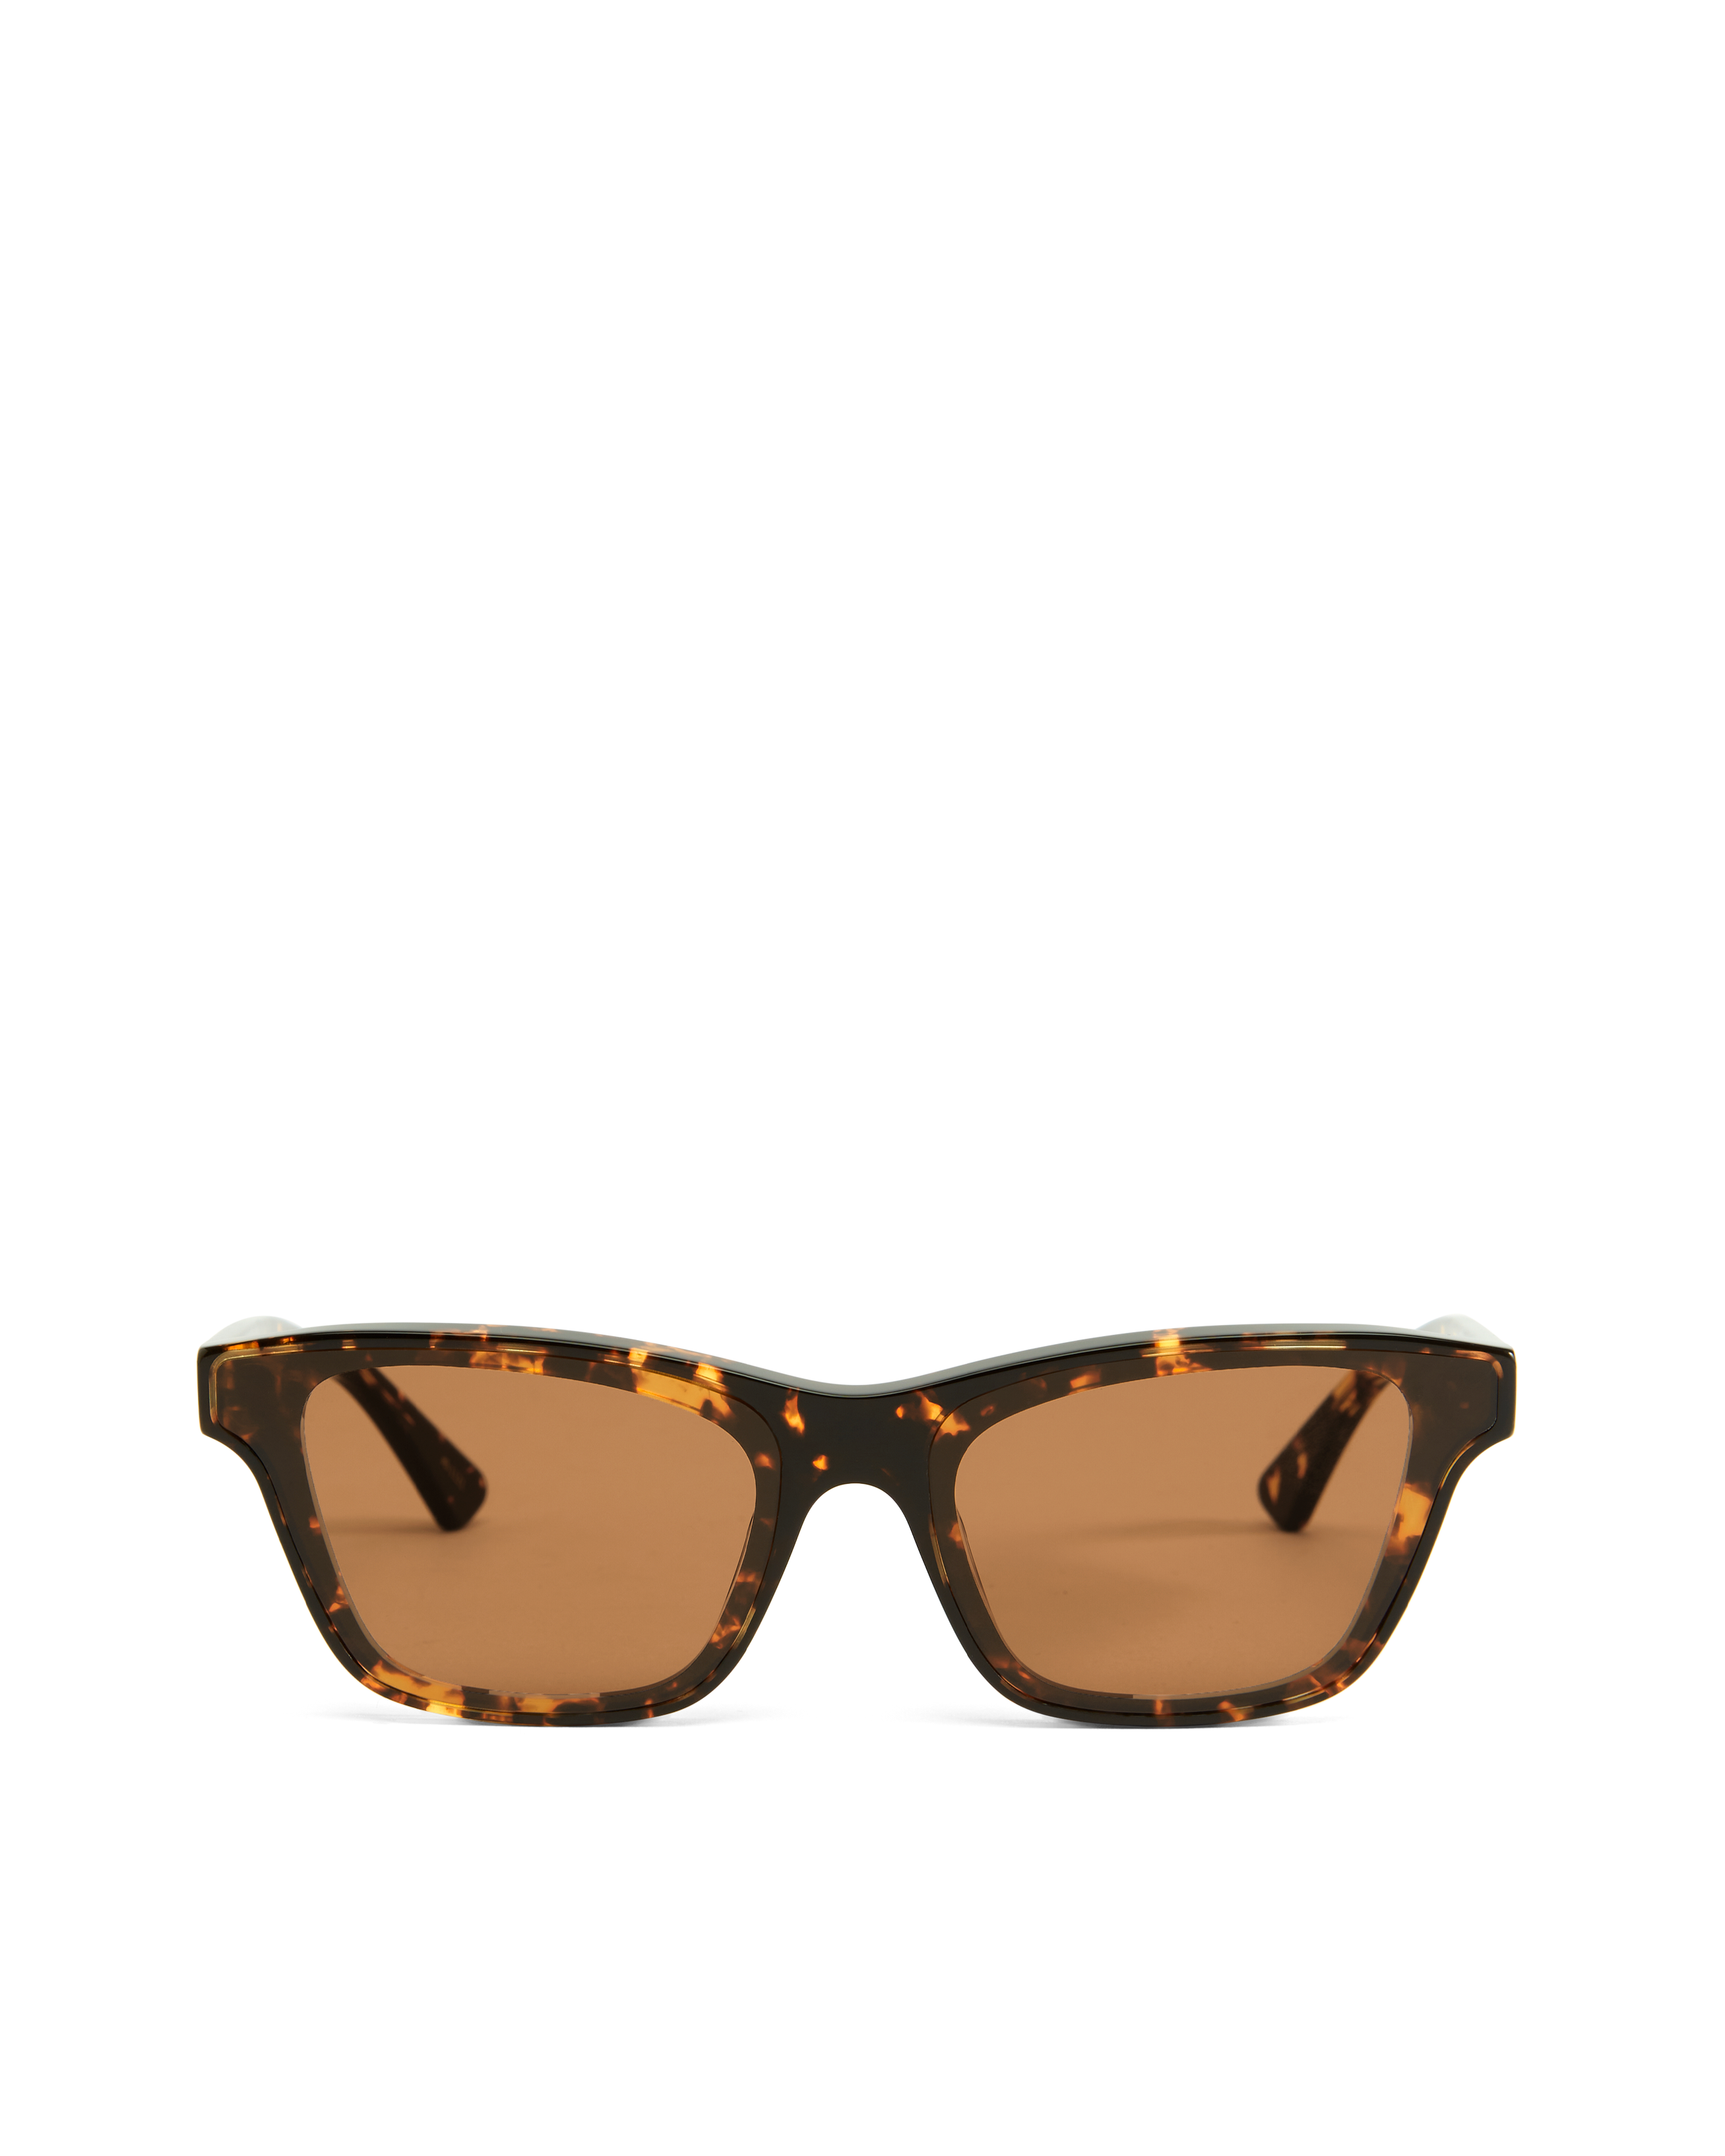 THE CINDY - AMBER TORT-CARAMEL The Cindy by Banbé are chic cat eye ...